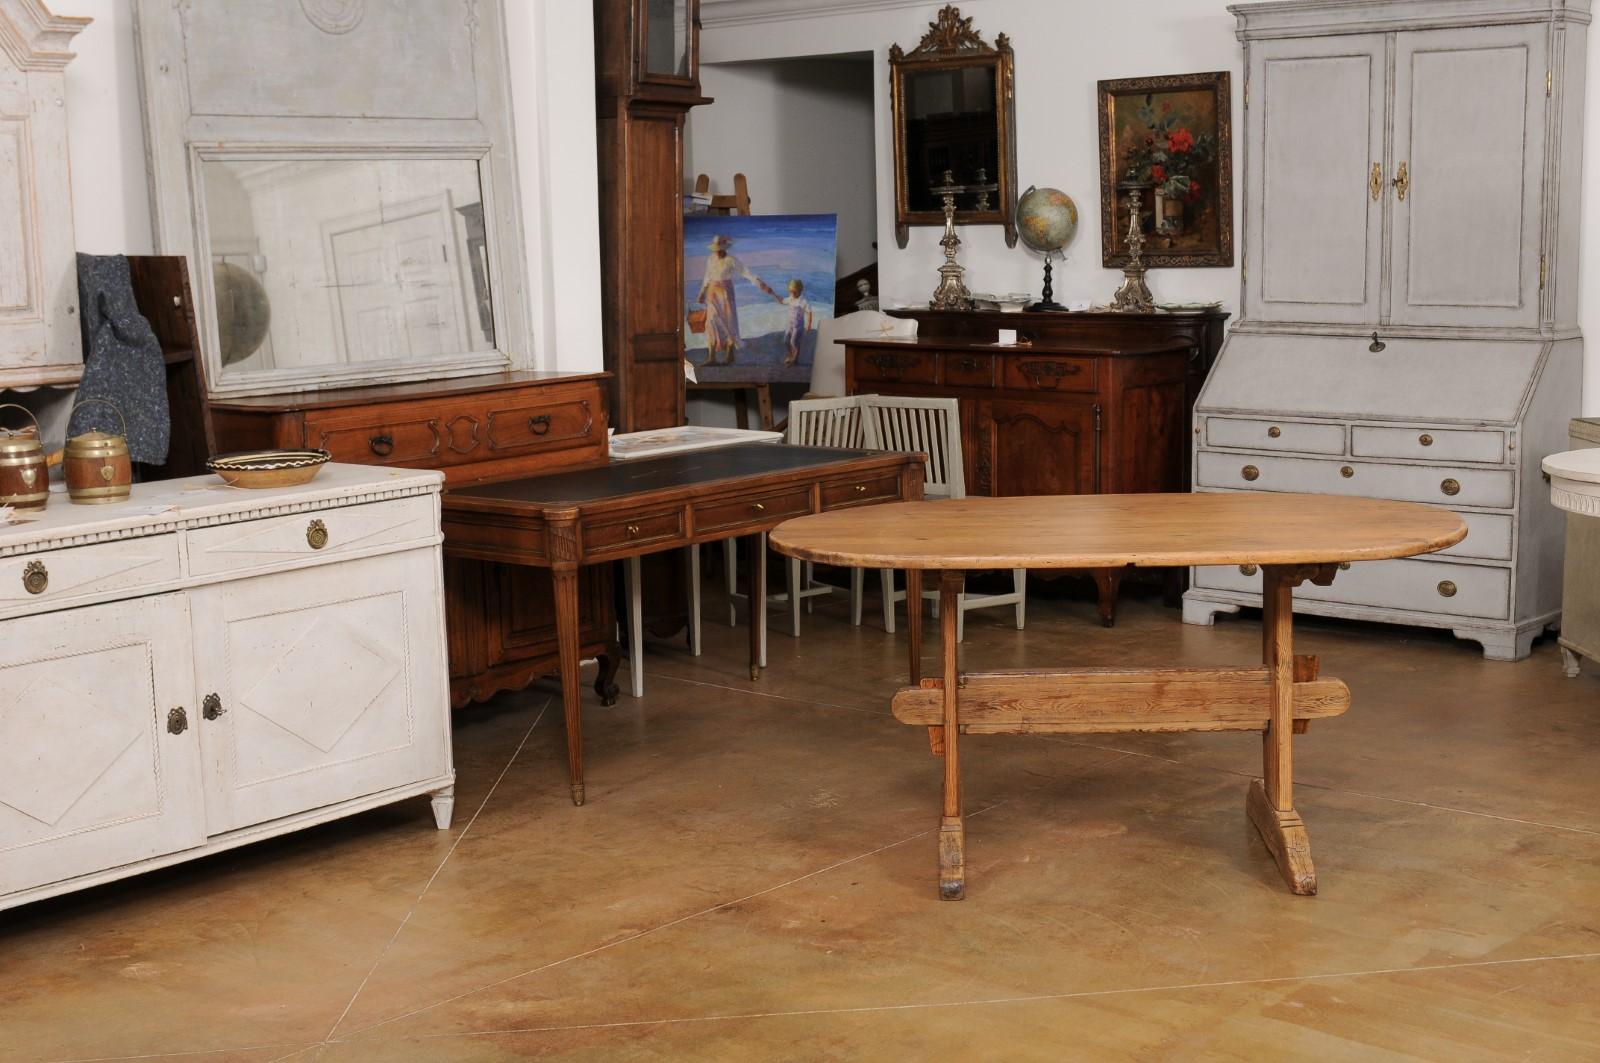 A Swedish Gustavian period rustic dining room table from the early 19th century, with oval top, trestle base and distressed patina. Created in Sweden during the early years of the 19h century, this Gustavian period dining room table charms us with